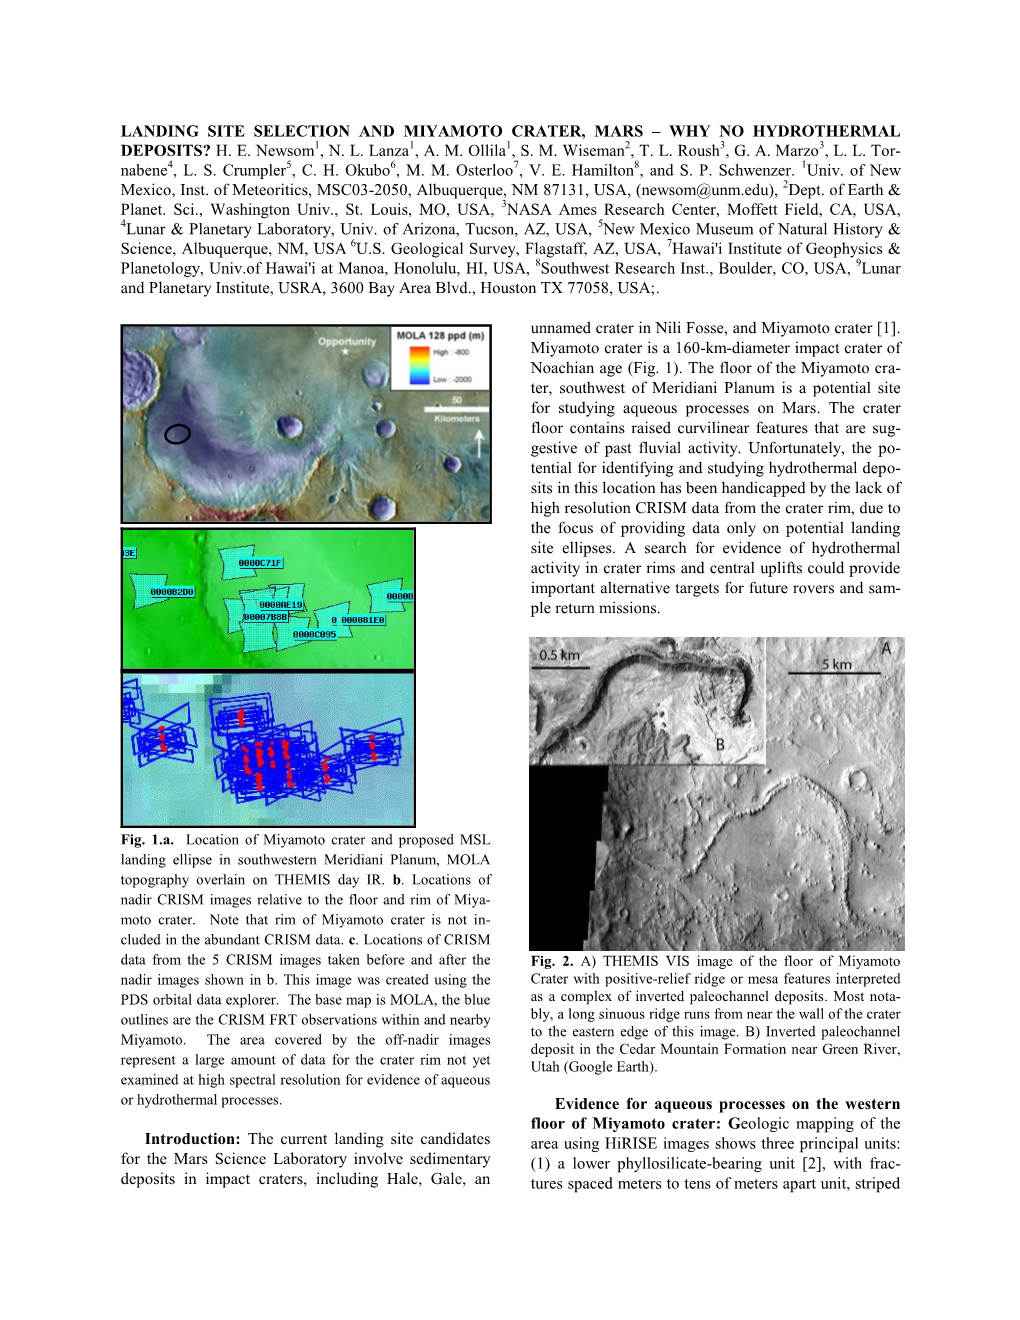 Landing Site Selection and Miyamoto Crater, Mars – Why No Hydrothermal Deposits? H